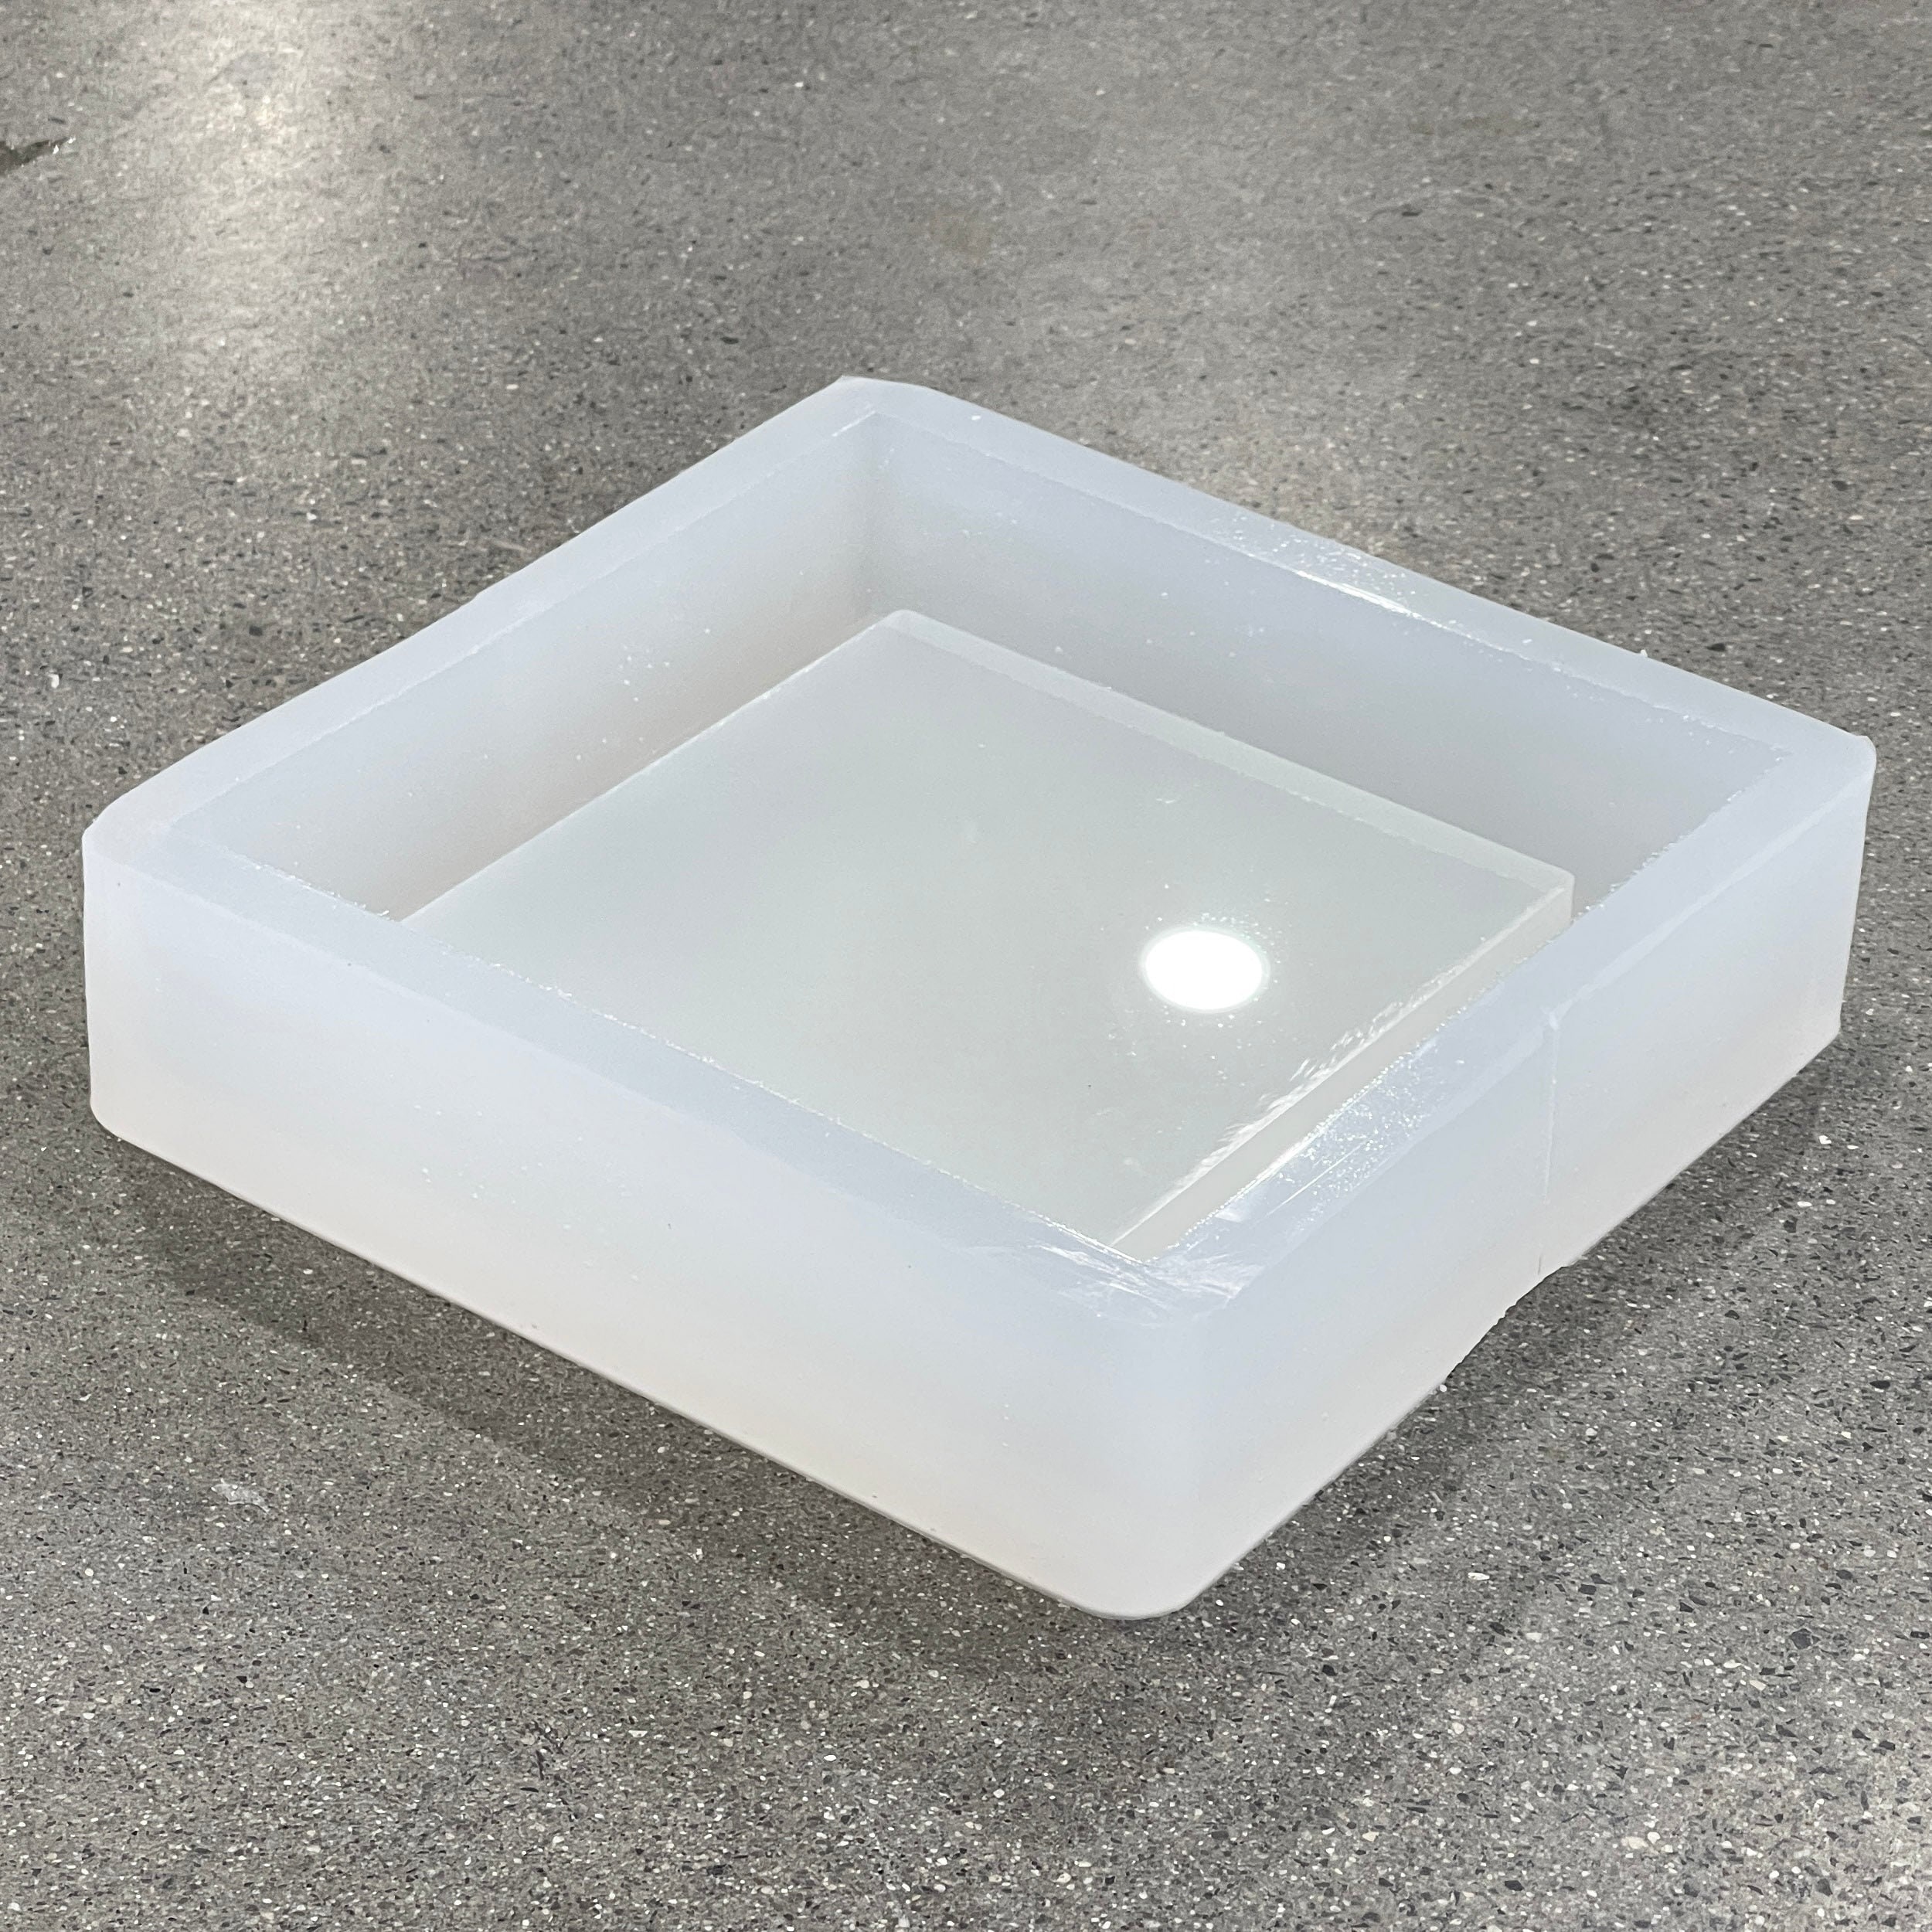 8x8x2 Deep Tray Silicone Mold For Epoxy Resin - 1 Deep Dish Mold